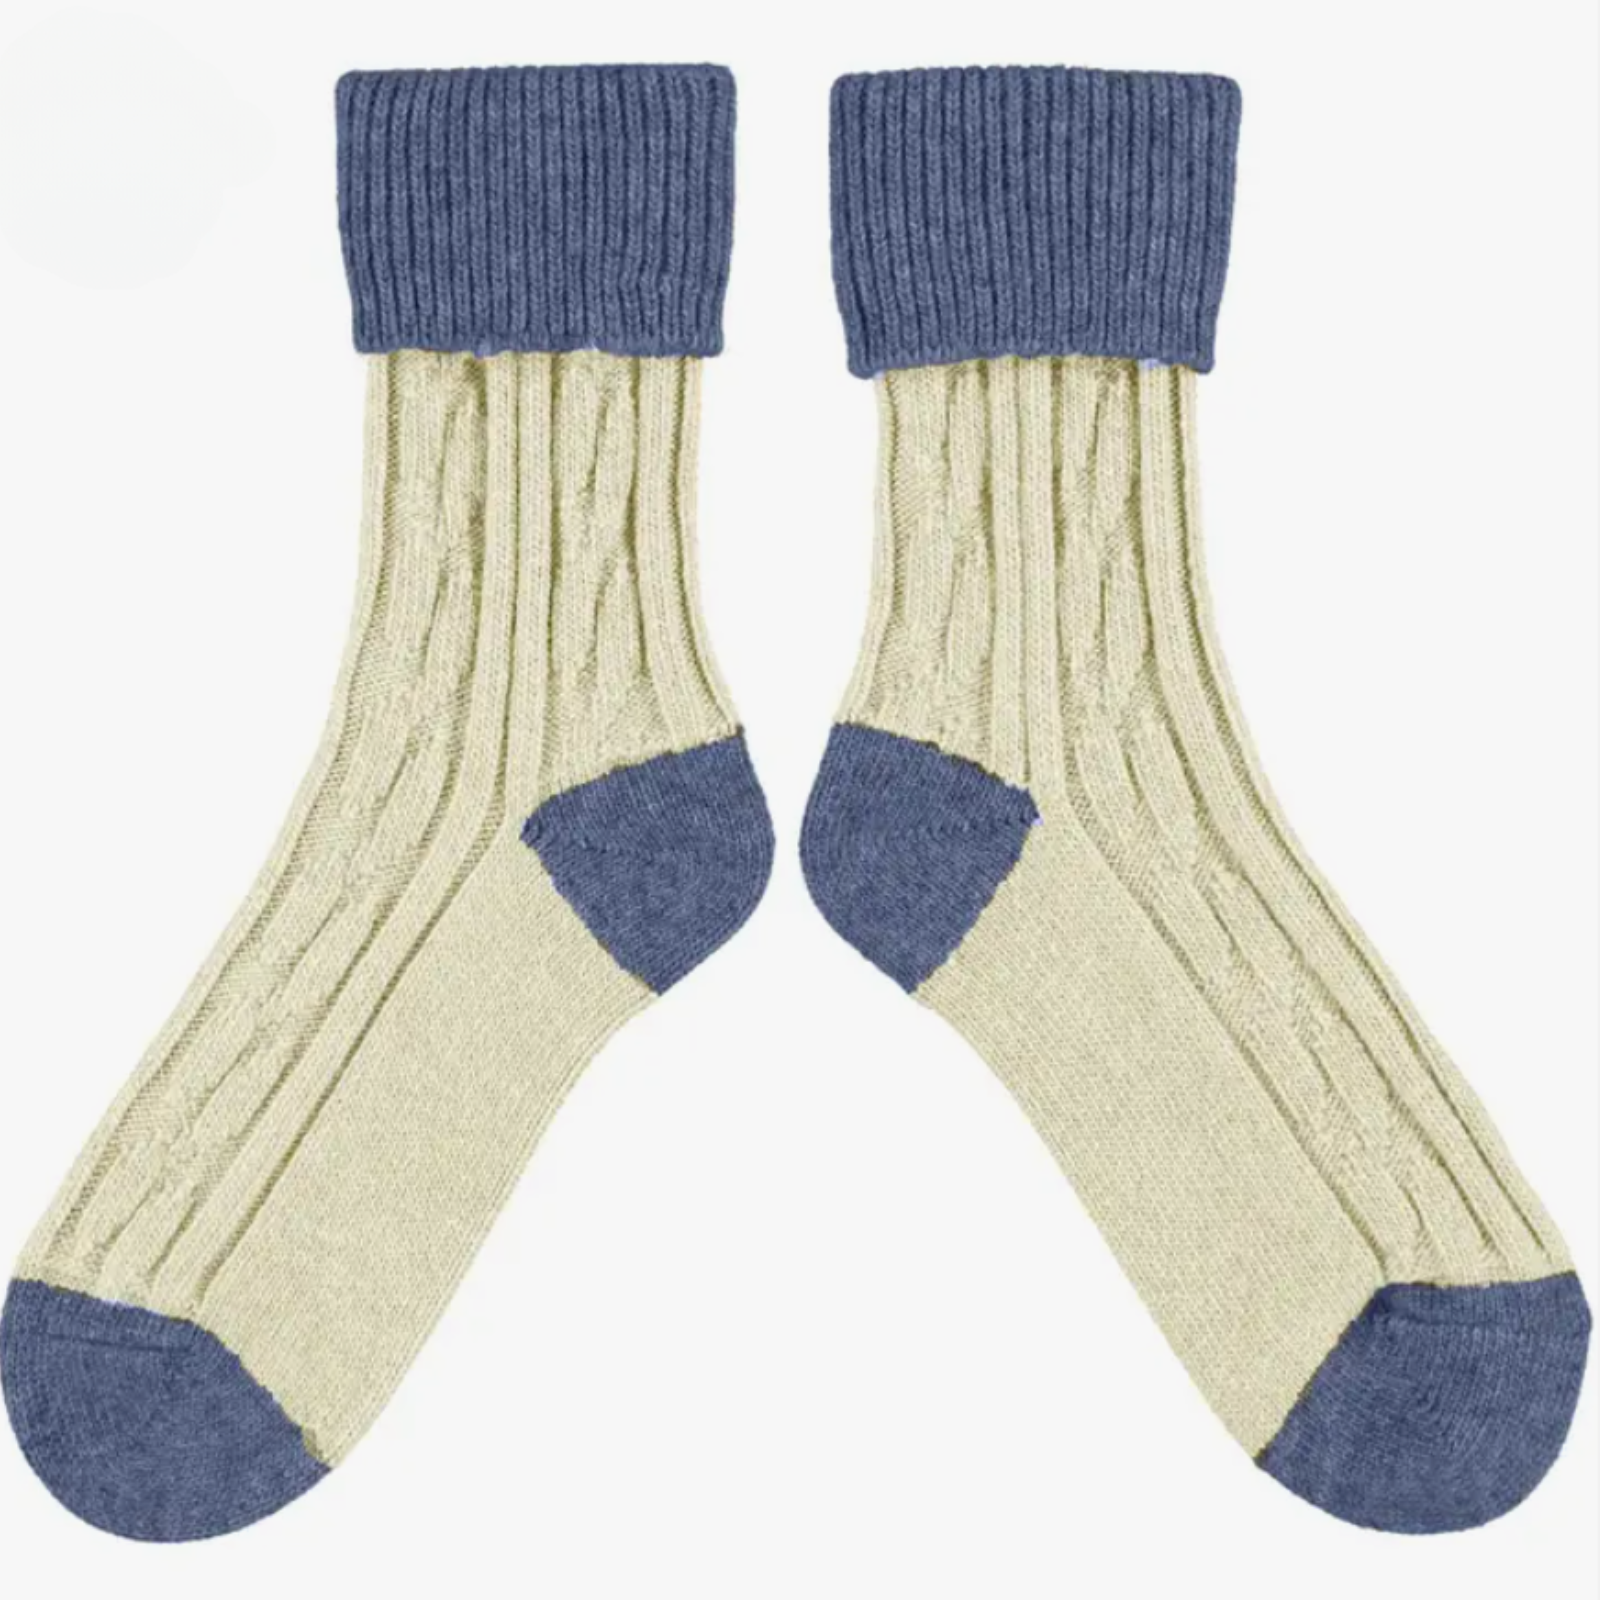 Catherine Tough Slouch Cashmere Blend women's and men's crew socks featuring cable knit socks with denim colored cuff, heel and toes and oatmeal colored body. Socks shown on display. 